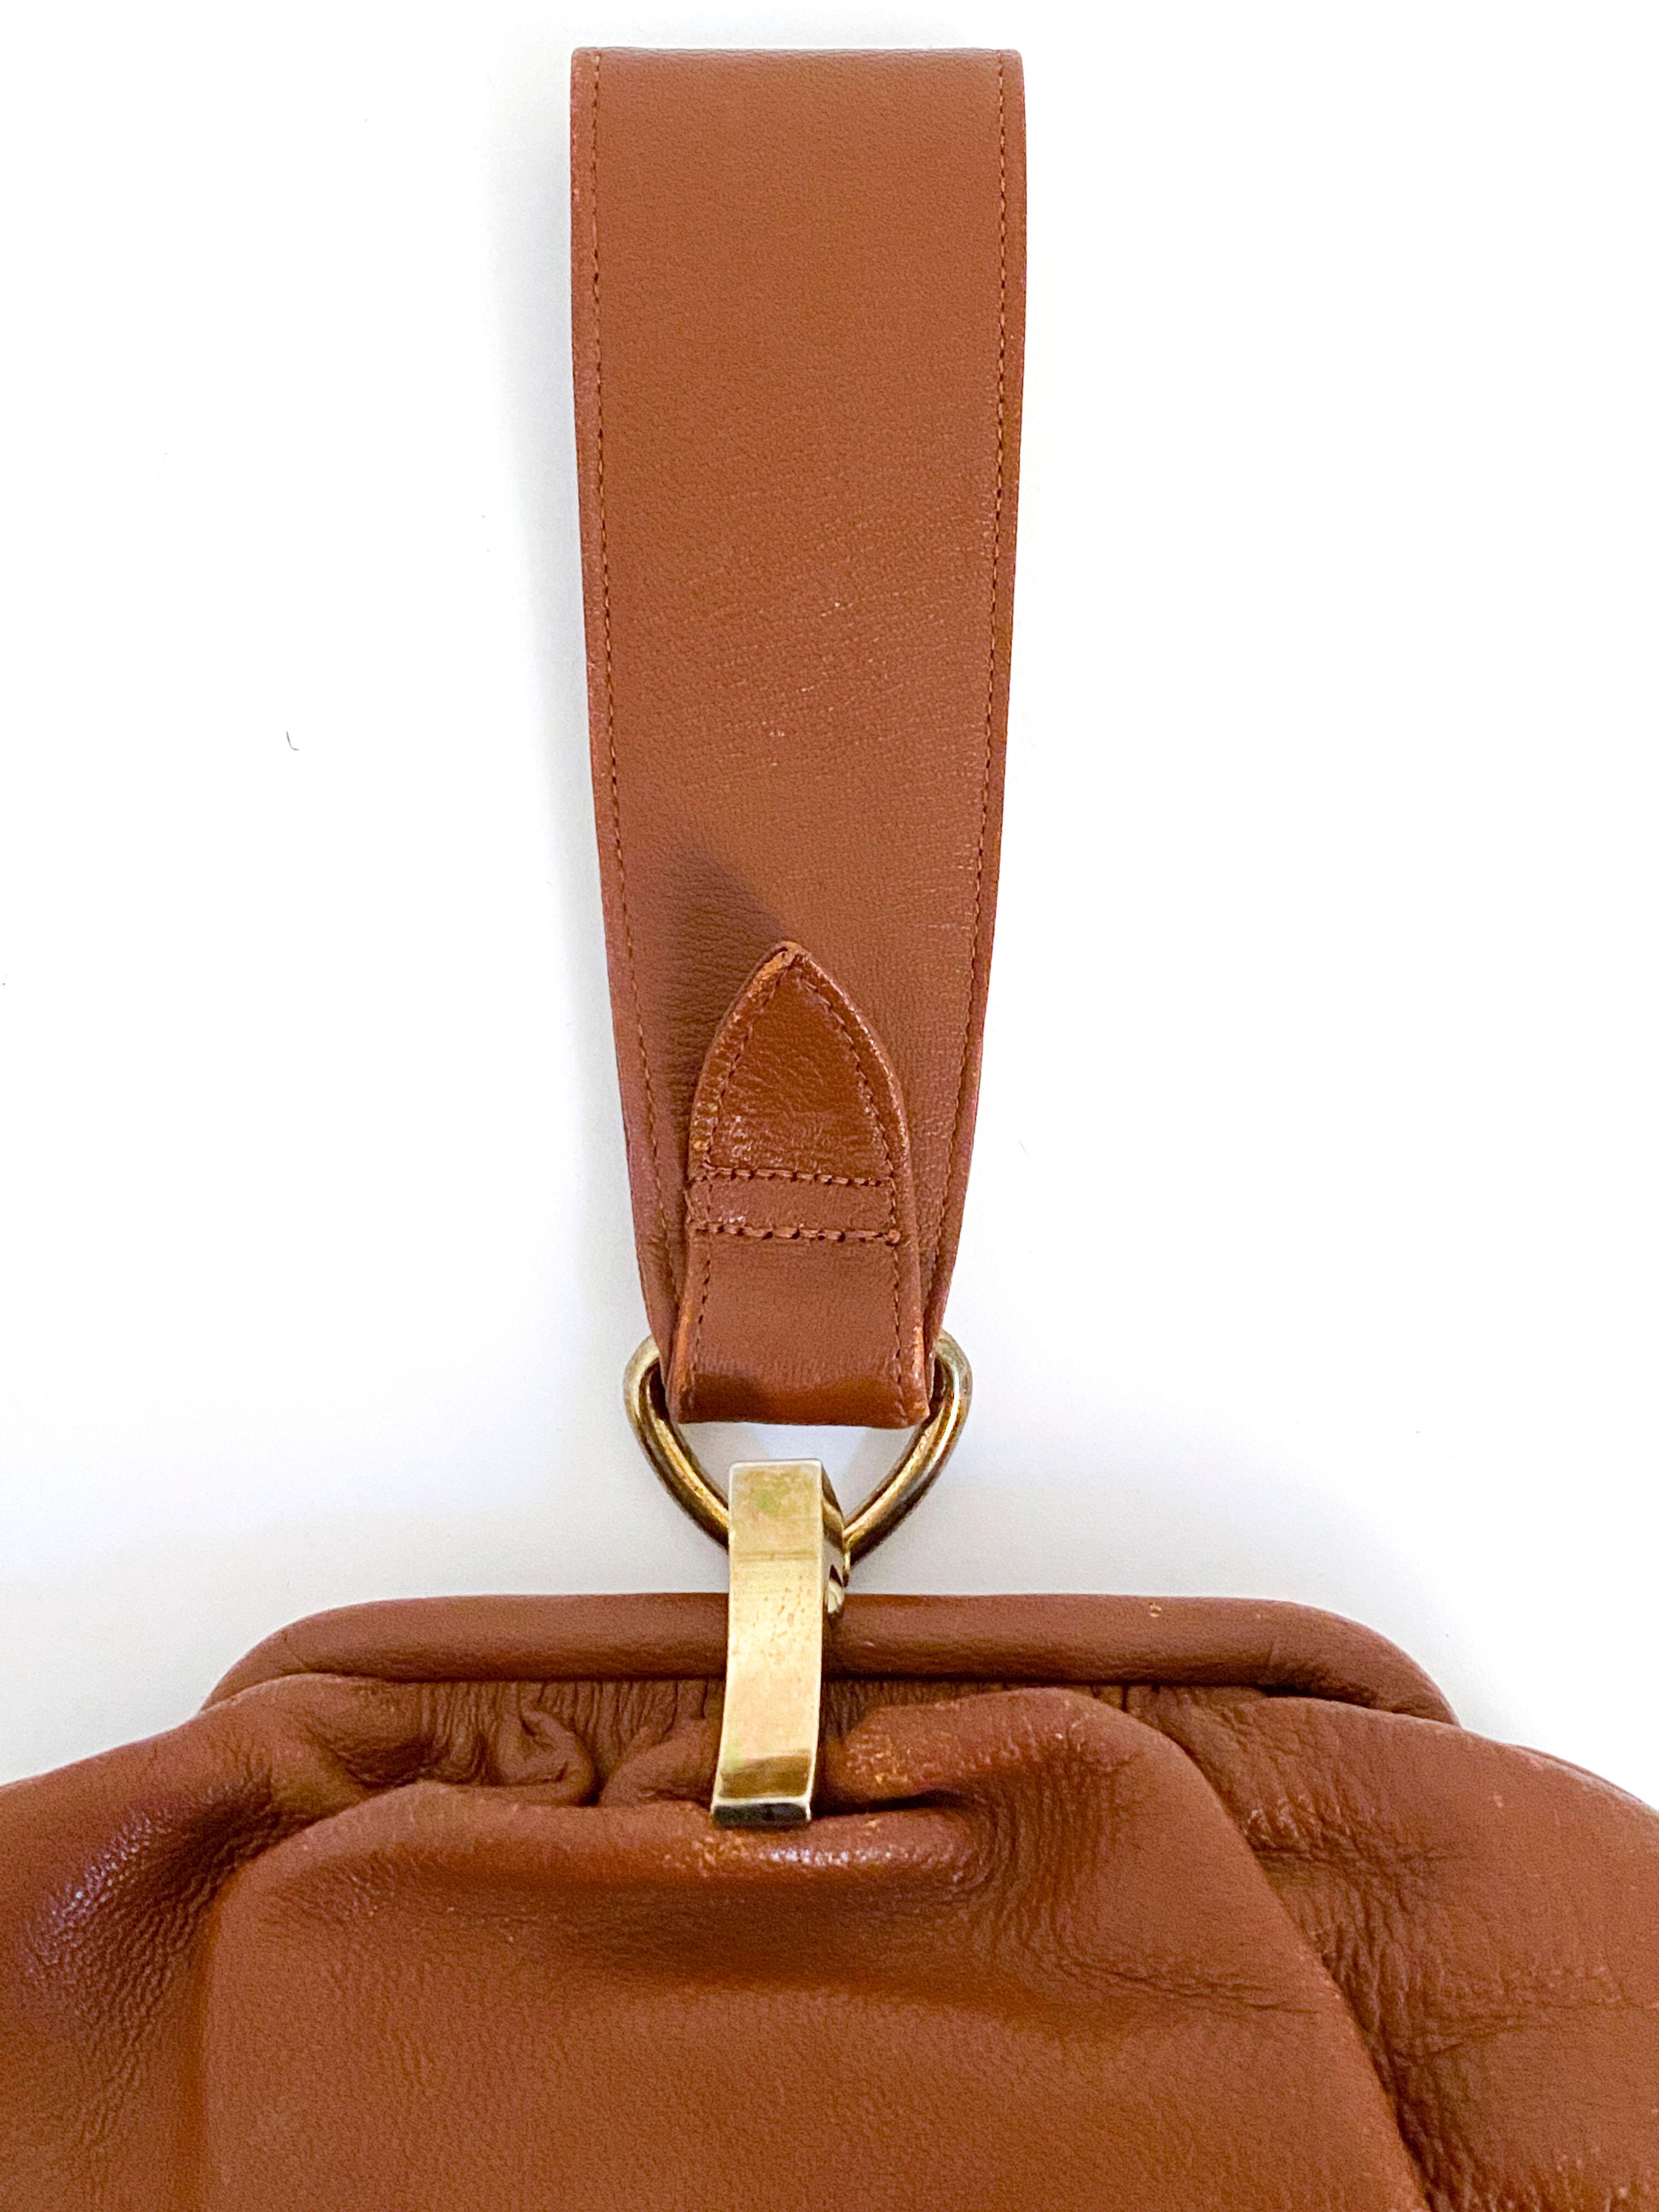 1930s Art Deco brown goat skin leather handbag with single leather wrist strap attached with brass hardware to complement the brass latch closure. The body of the bag is pleated to add volume and is semi-structured with the frame of the purse. The